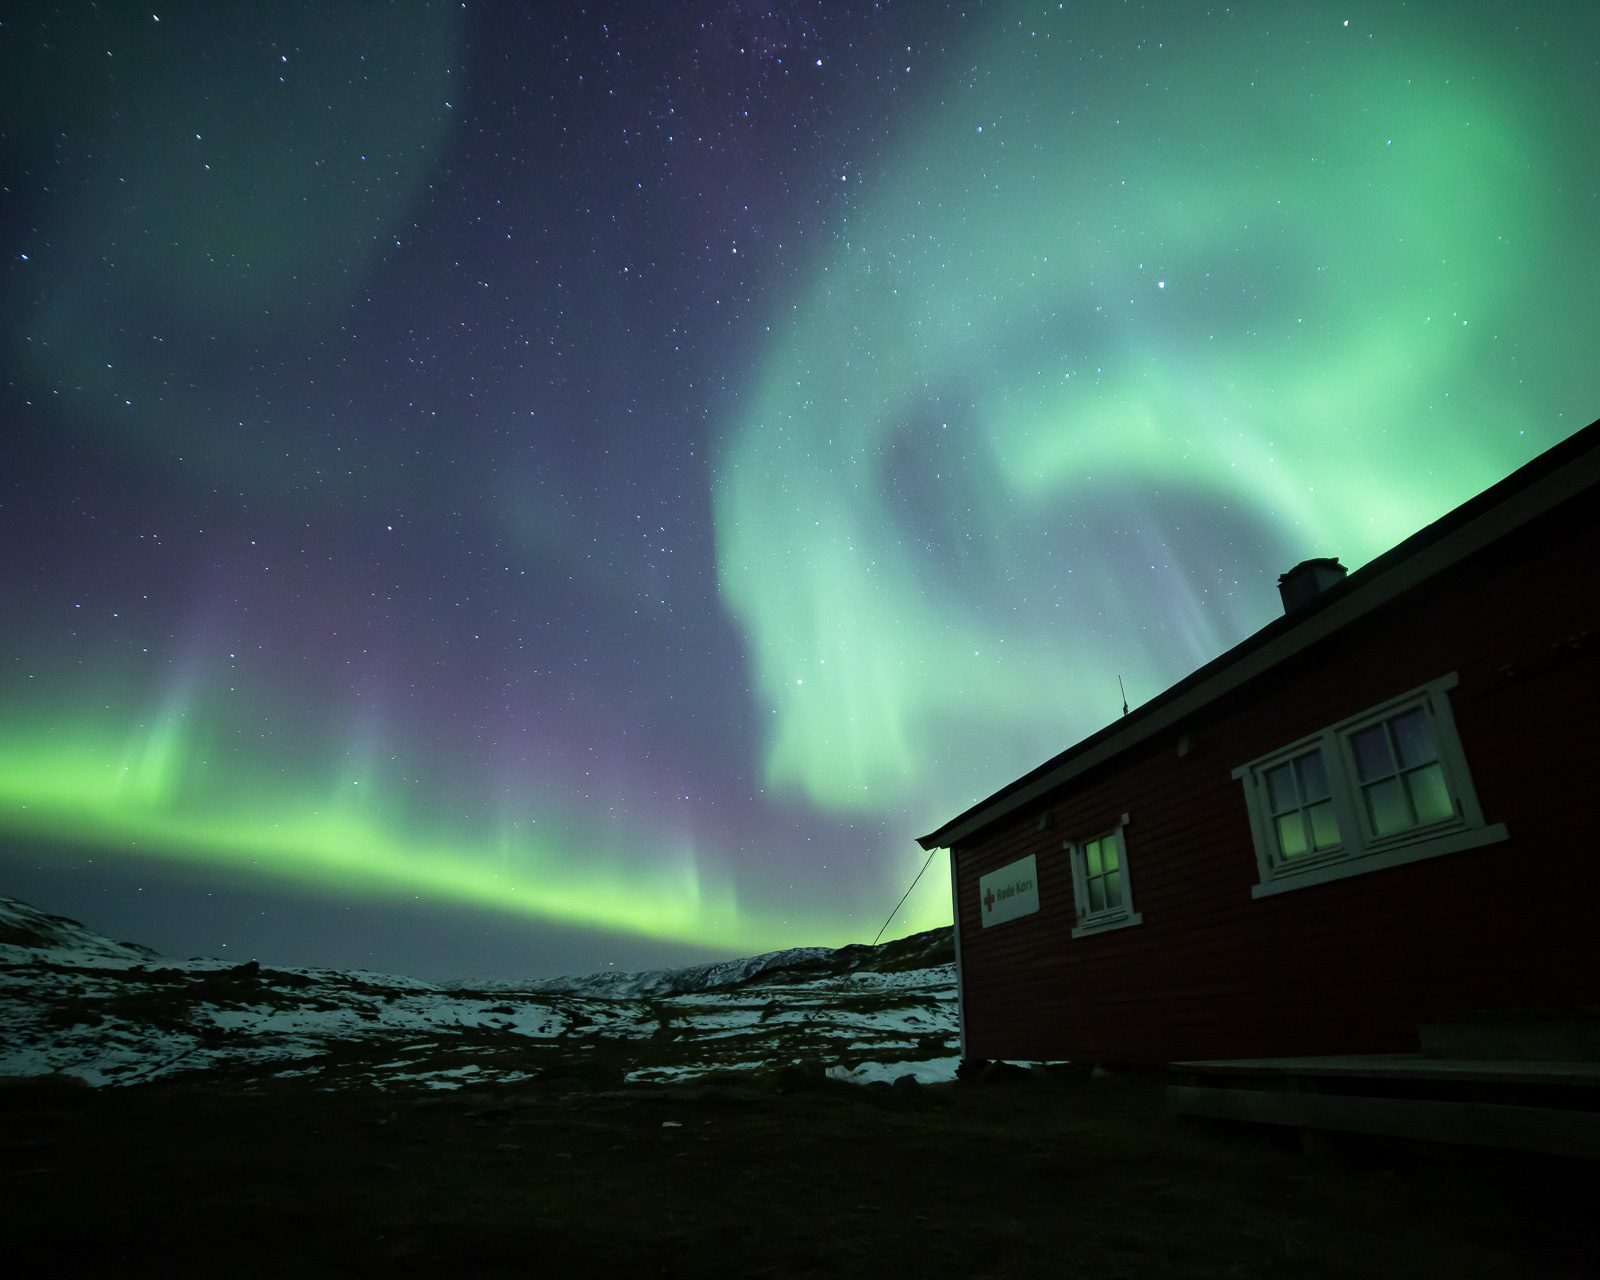 The northern lights dancing to the south of the cabins © William Copeland